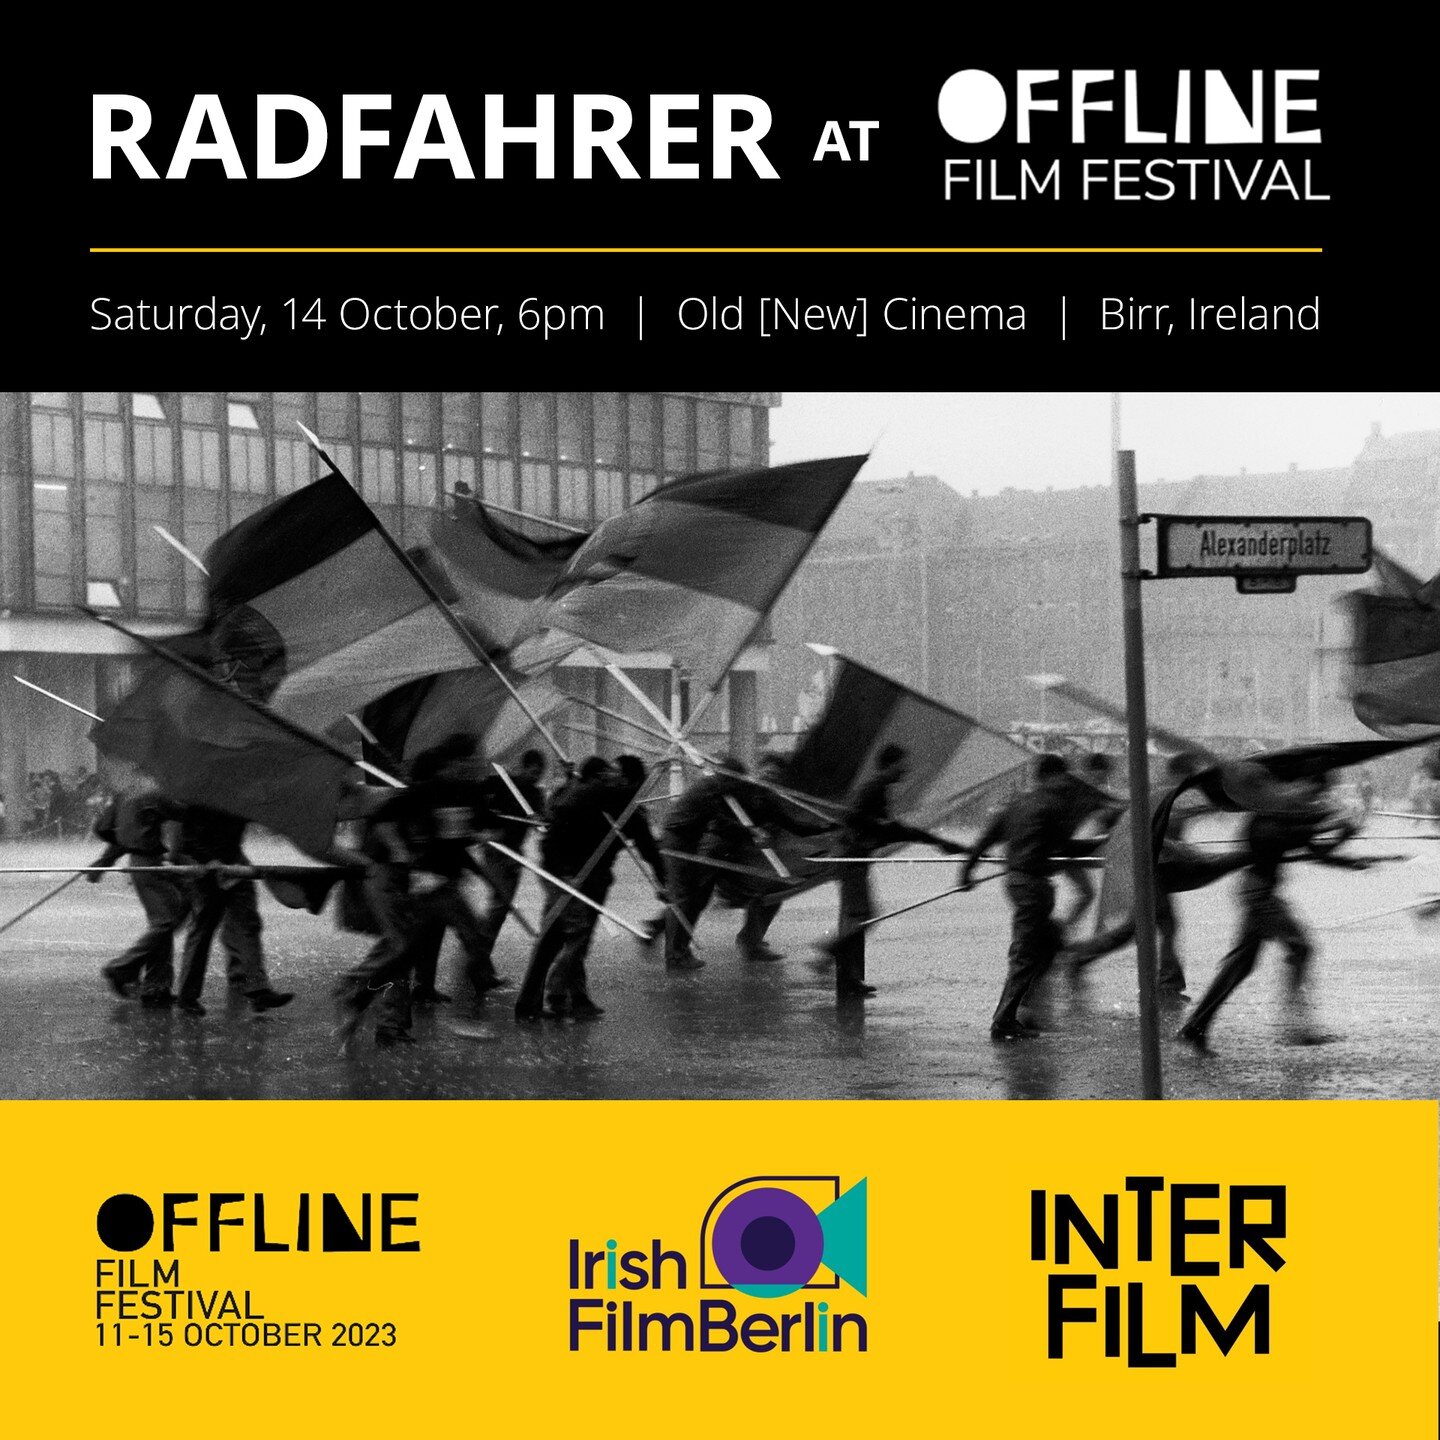 I'm delighted that @offlinefilmfestival is showing my short doc RADFAHRER! Looking forward to the screening on Saturday and the festival in Birr, Ireland! 📽️ Thanks for the invite OFFline, @interfilm_berlin &amp; @irishfilmberlin !

▶️ link in bio

